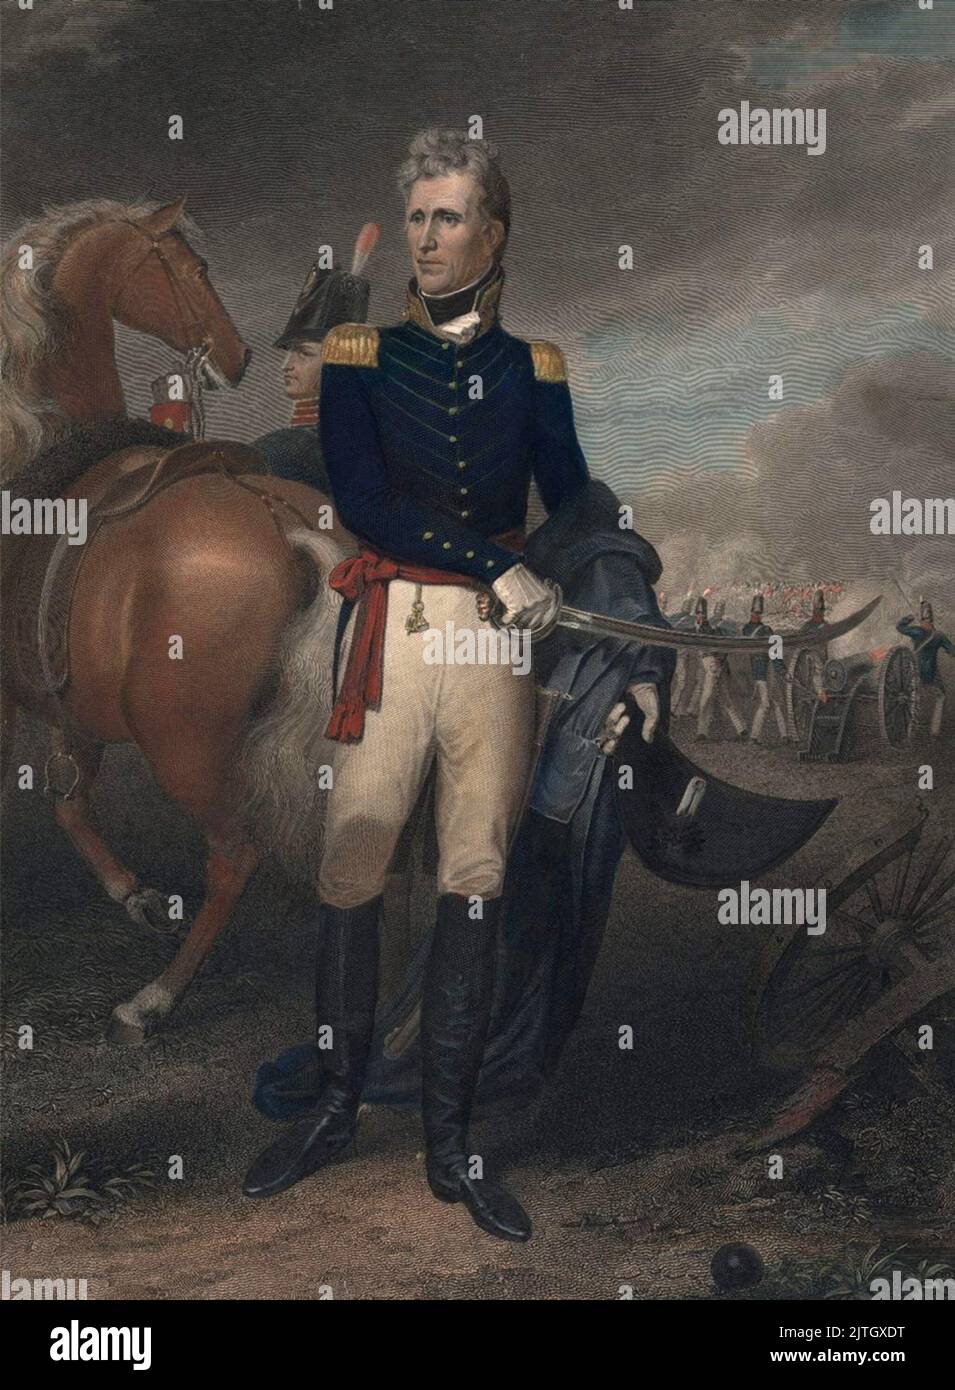 A painting of Andrew Jackson, who was the seventh president of the USA,  at the Battle of New Orleans on 8th Jan 1815. The painting is by John Vanderlyn. Stock Photo